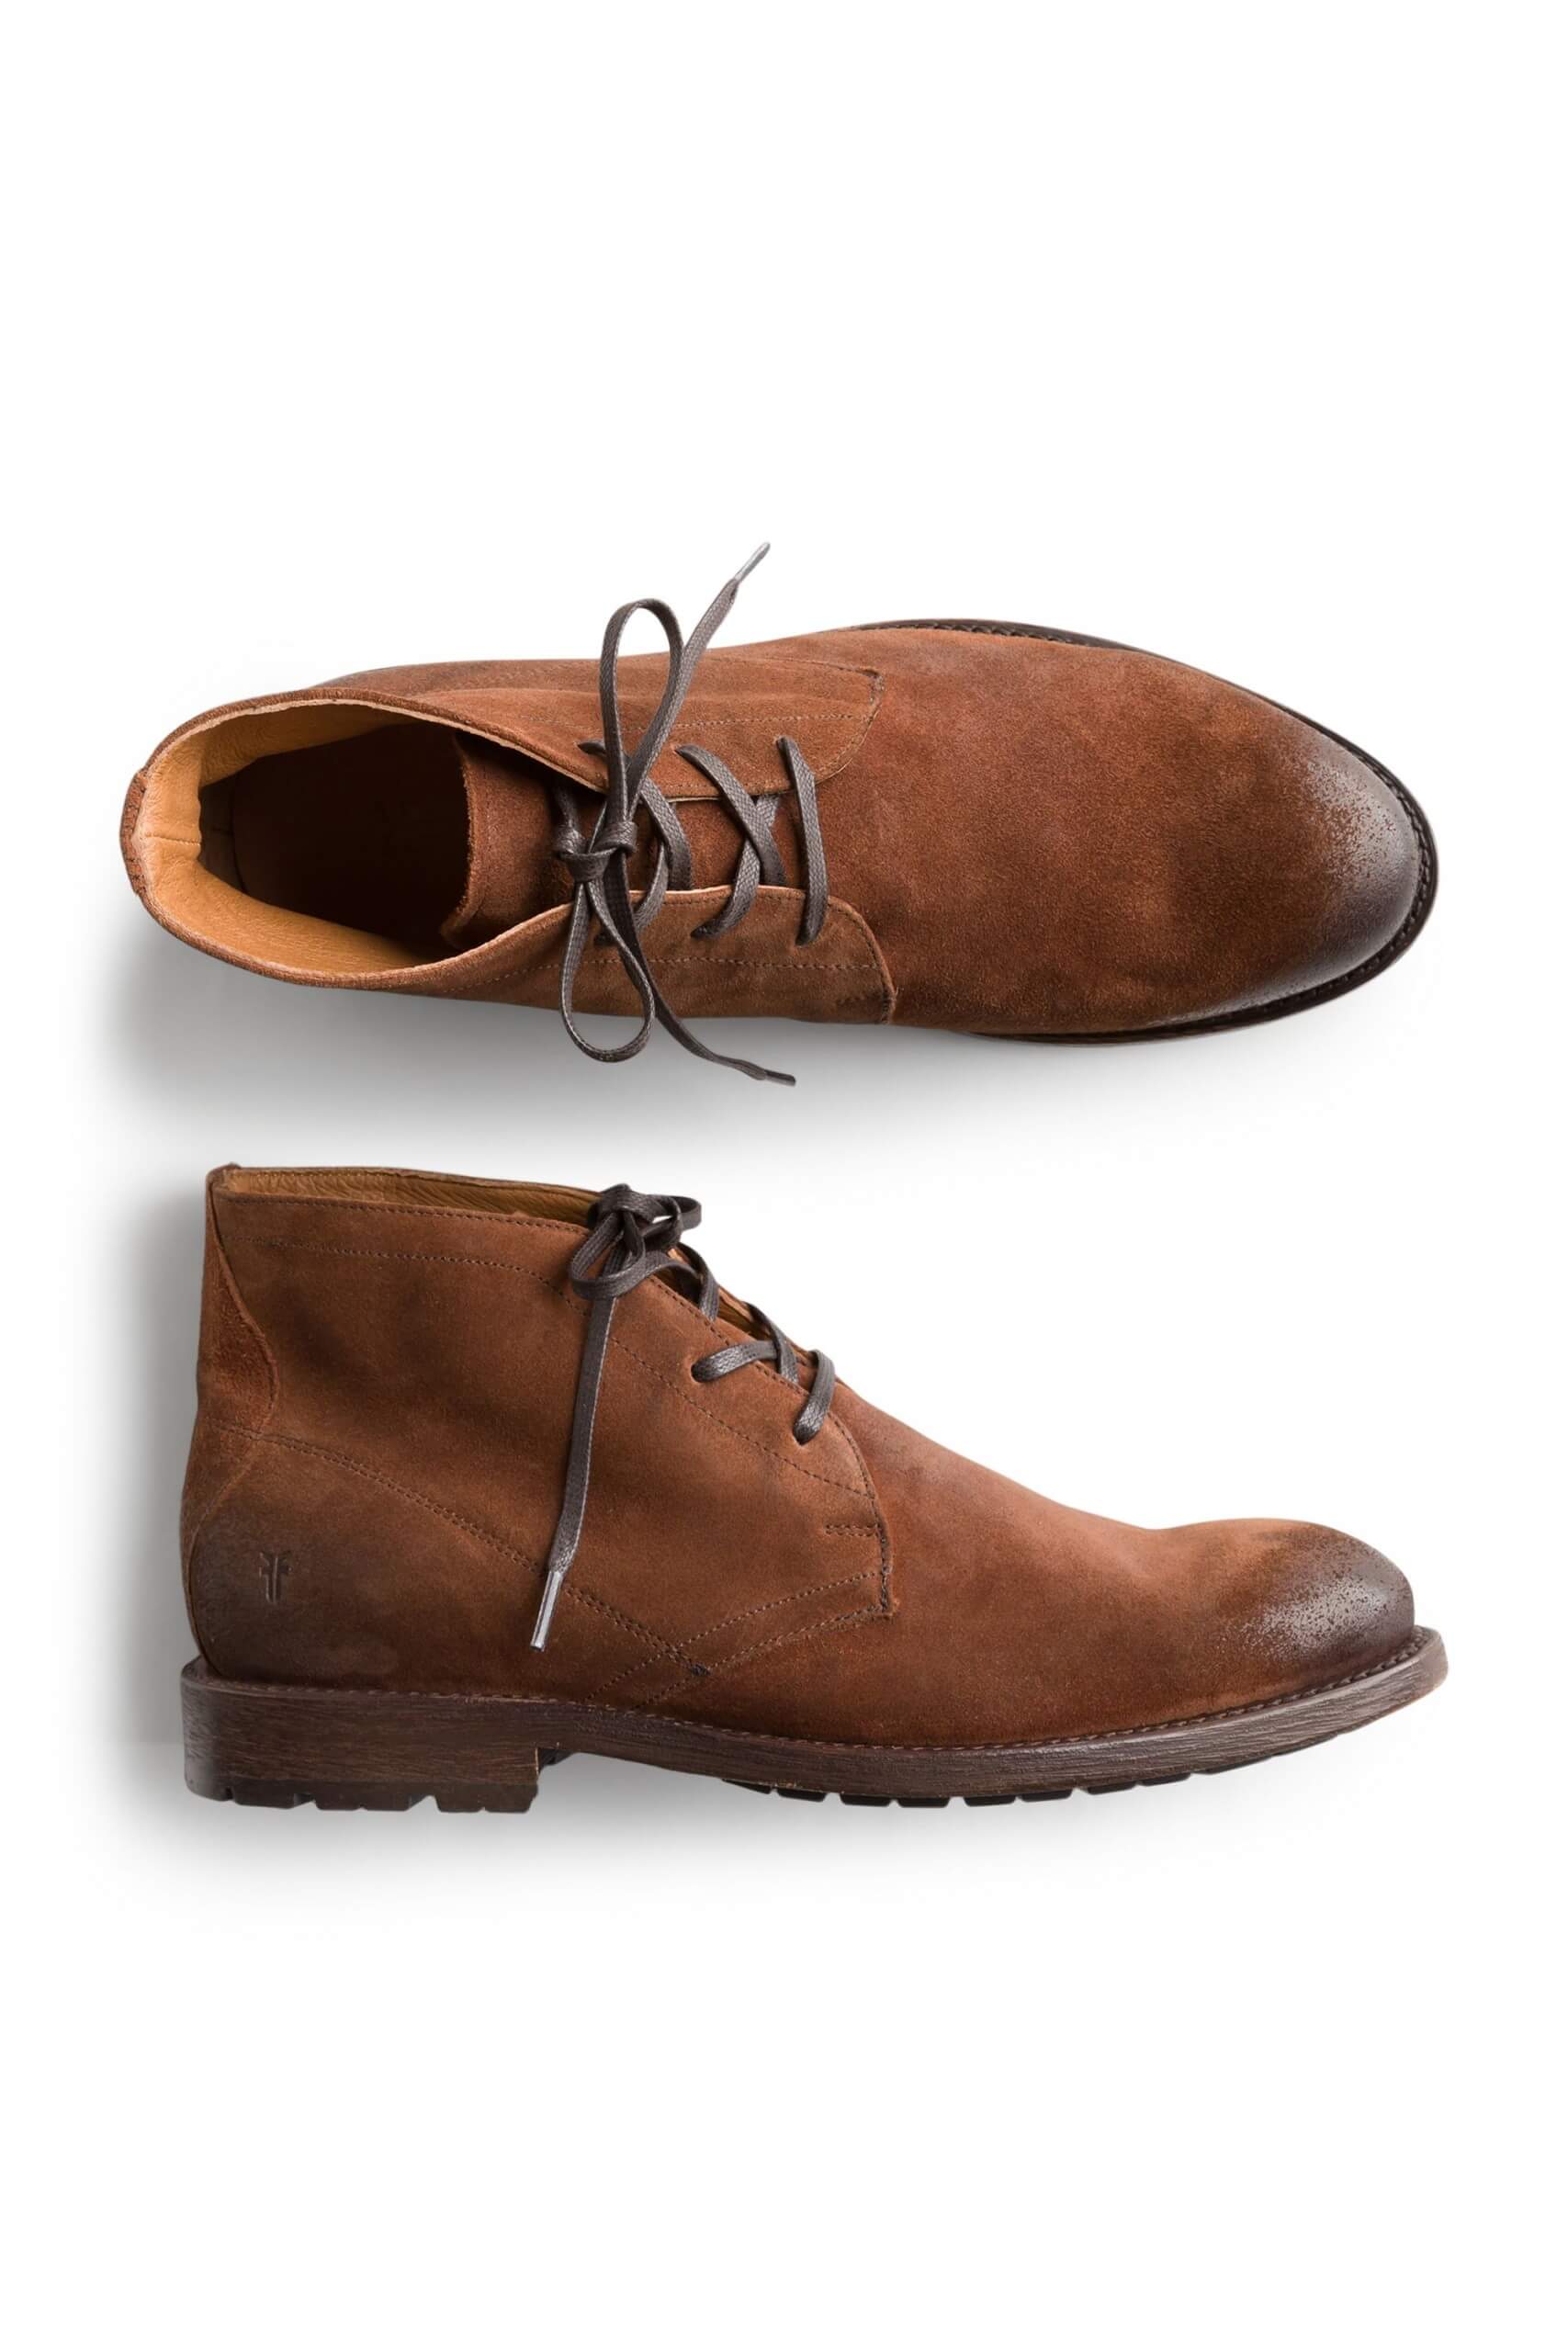 Omkreds Destruktiv så The Right Way to Pair Jeans with Shoes | Stitch Fix Men